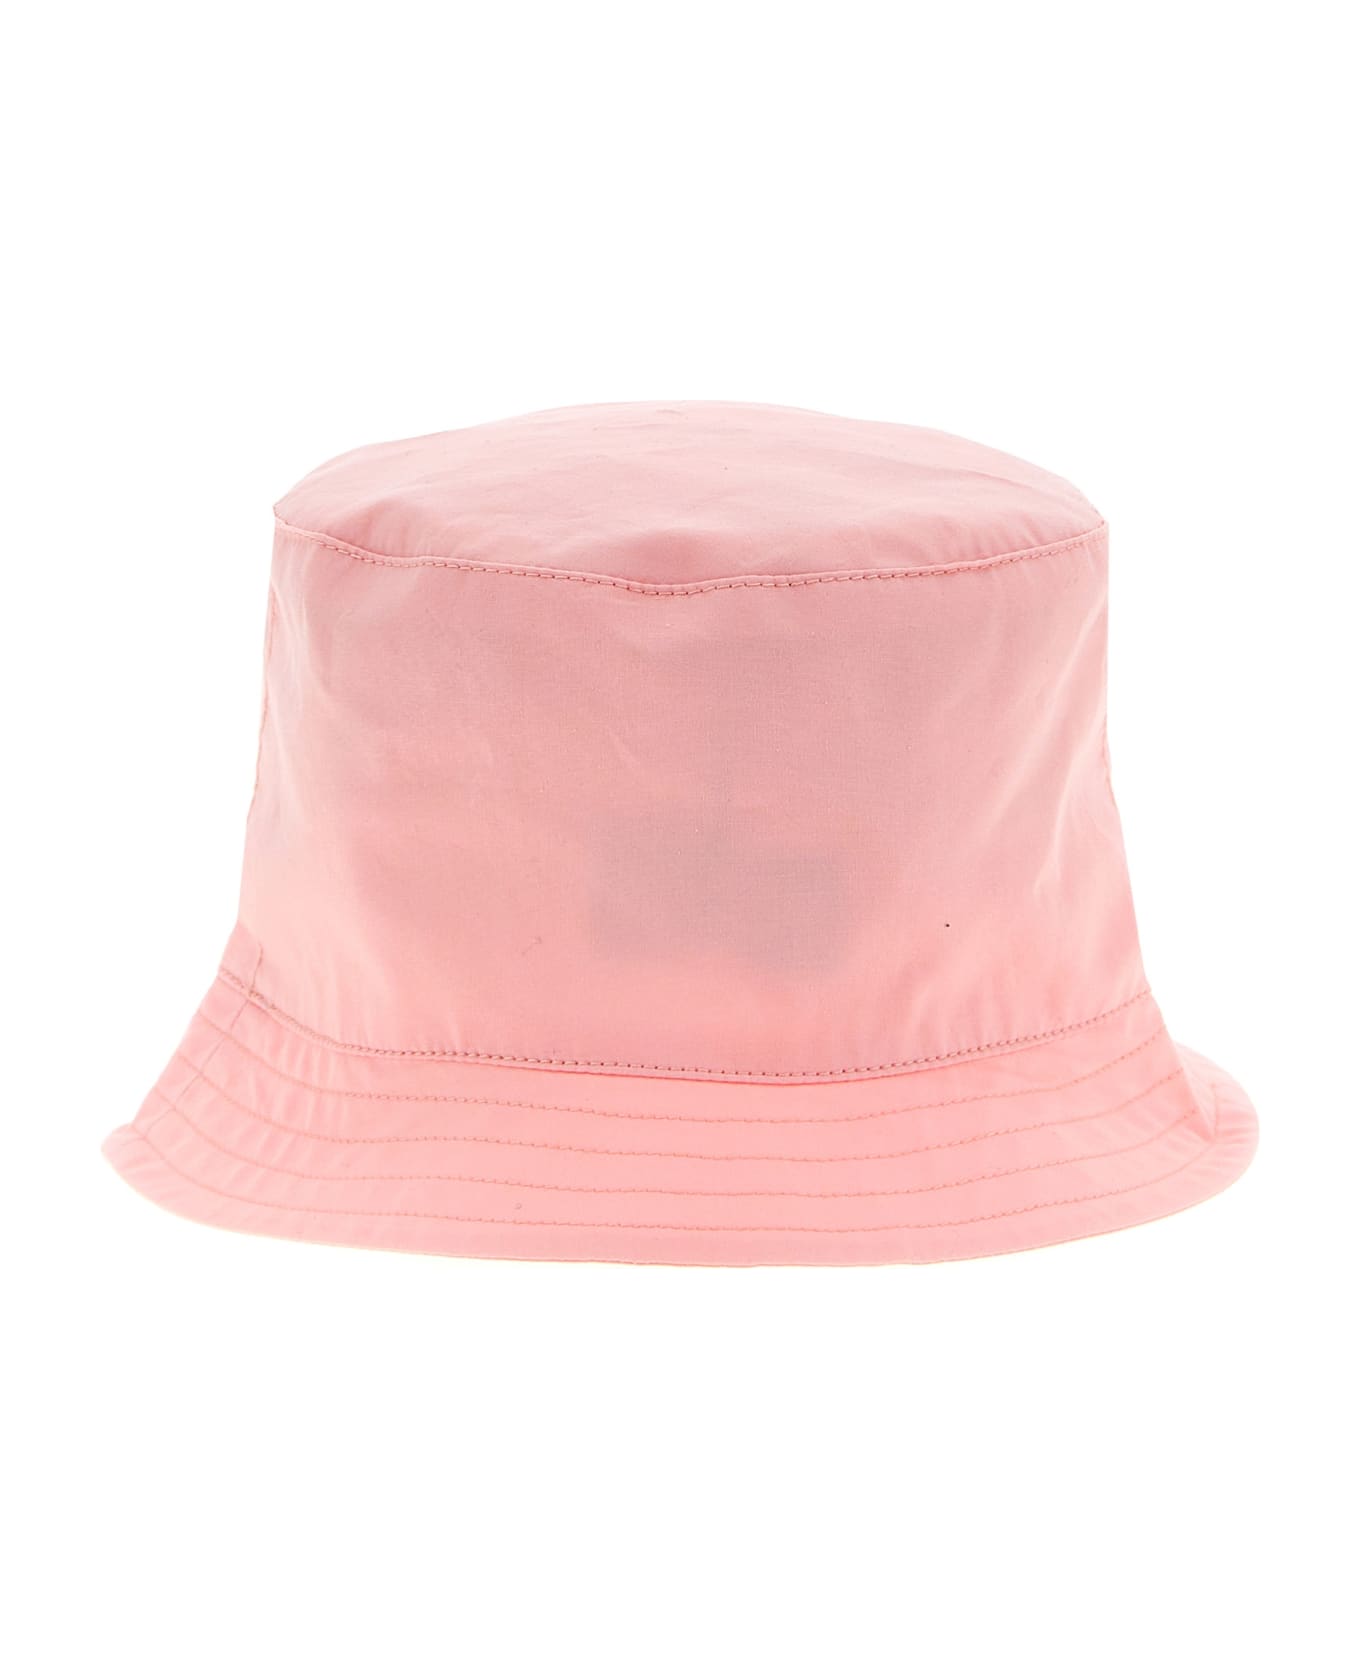 Moschino Logo Embroidery Bucket Hat - Pink アクセサリー＆ギフト